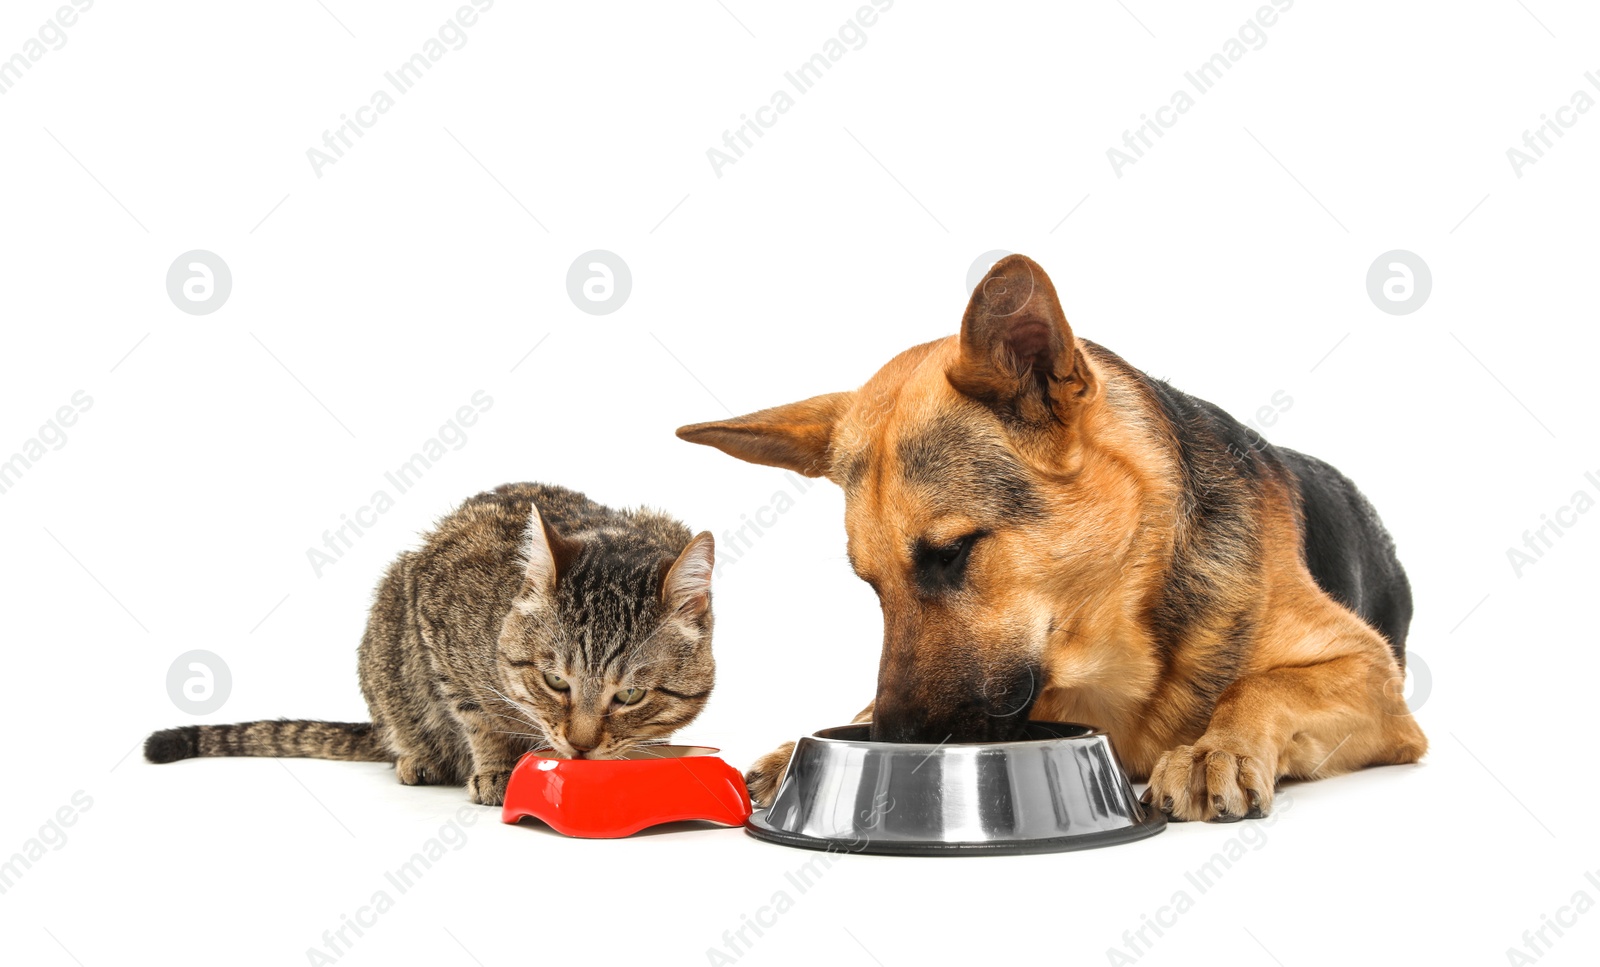 Photo of Adorable striped cat and dog eating together on white background. Animal friendship